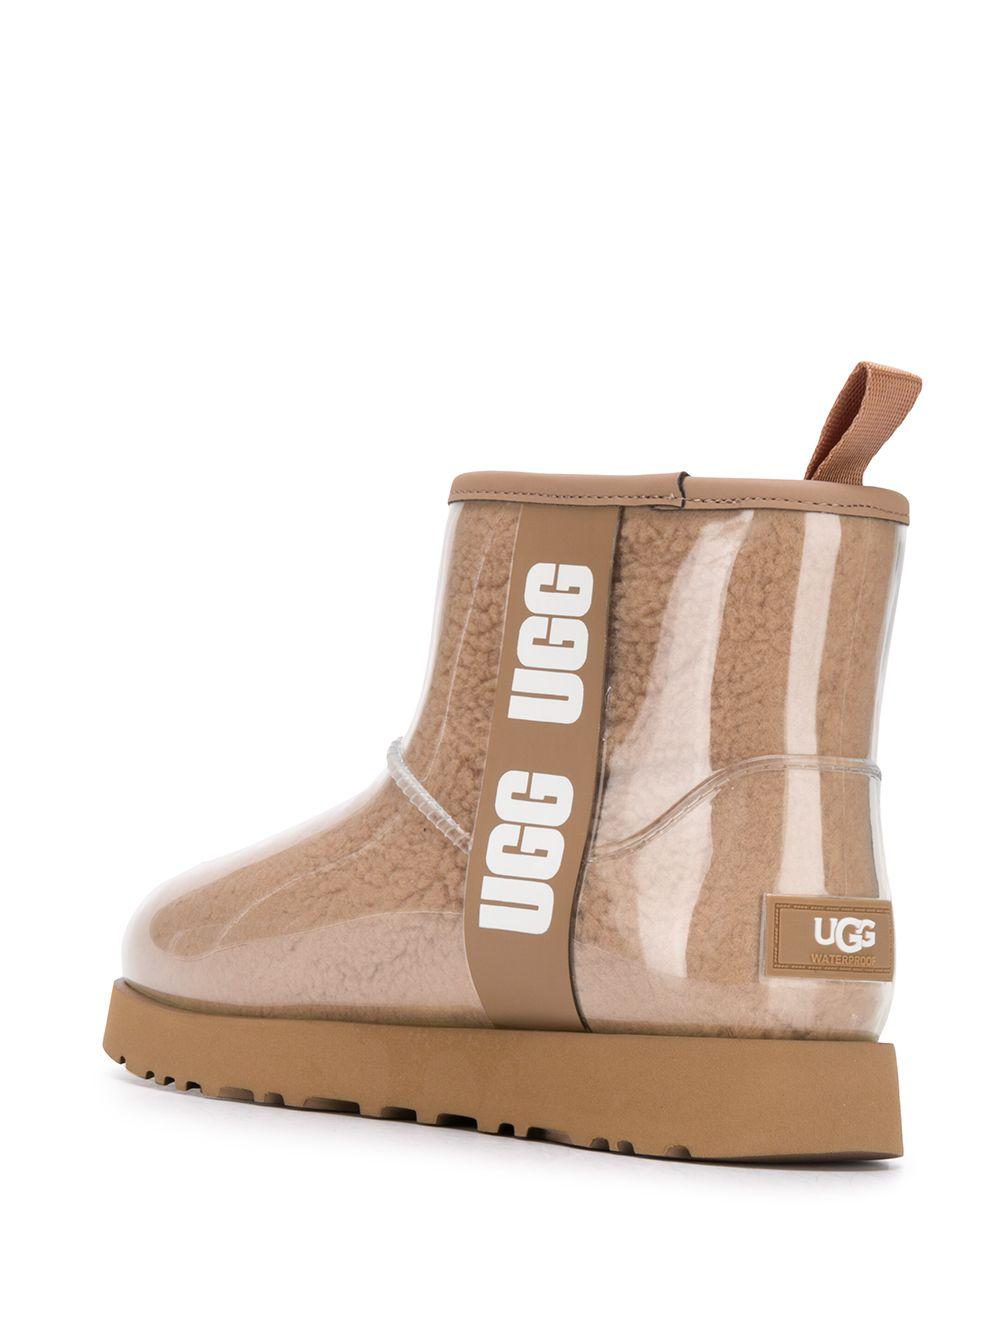 UGG Mini Classic Clear Boots in Beige (Natural) - Lyst